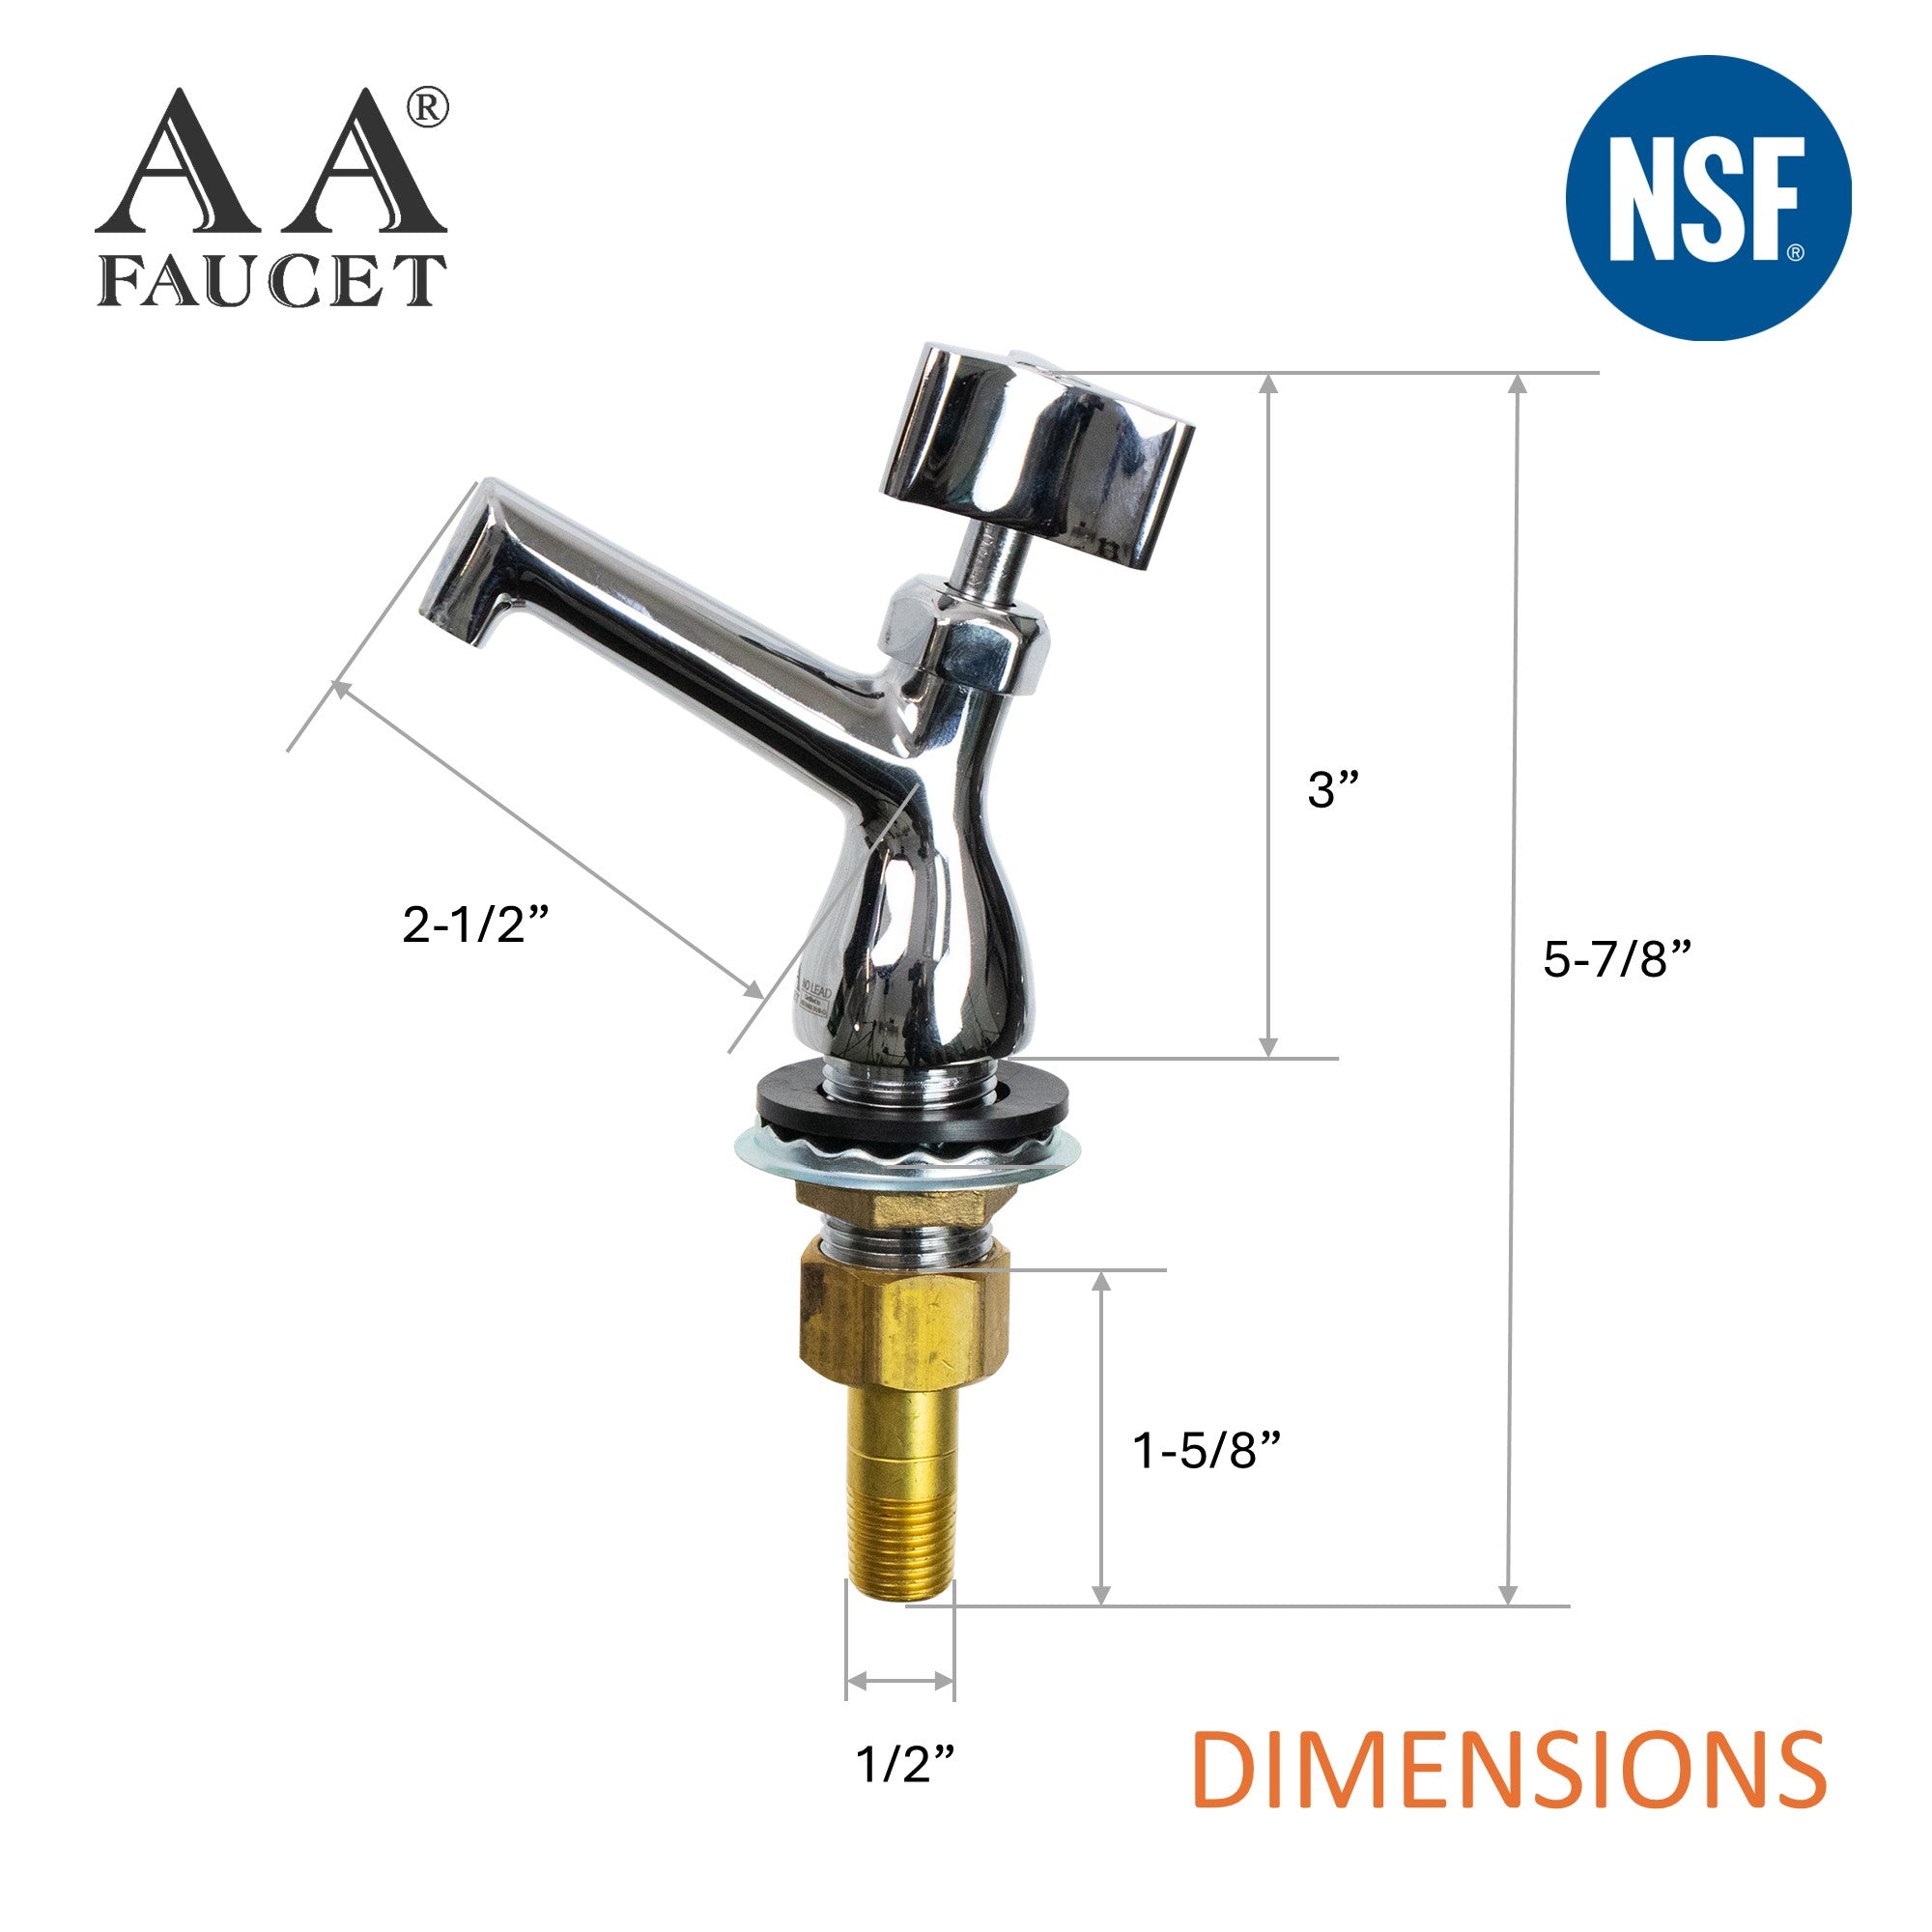 AA Faucet Heavy Duty Dipperwell Sink No Lead Faucet with 1/2" NPS Male Inlet NSF Approved